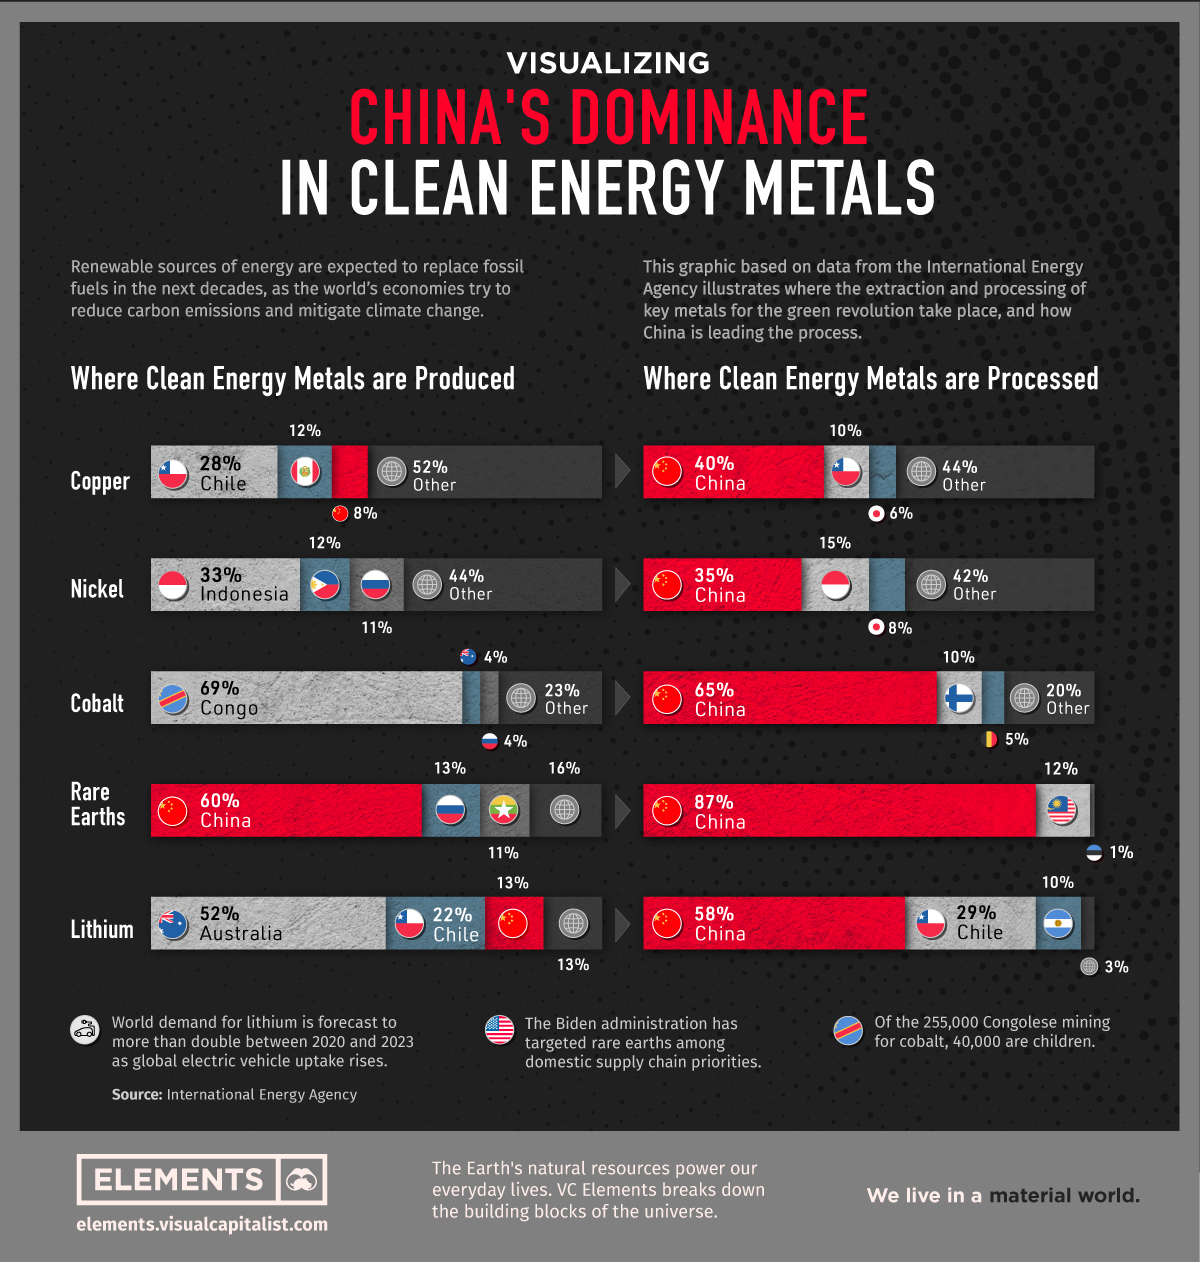 https://www.visualcapitalist.com/wp-content/uploads/2022/01/Visualizing-Chinas-Dominance-in-Clean-Energy-Metals-1.jpg